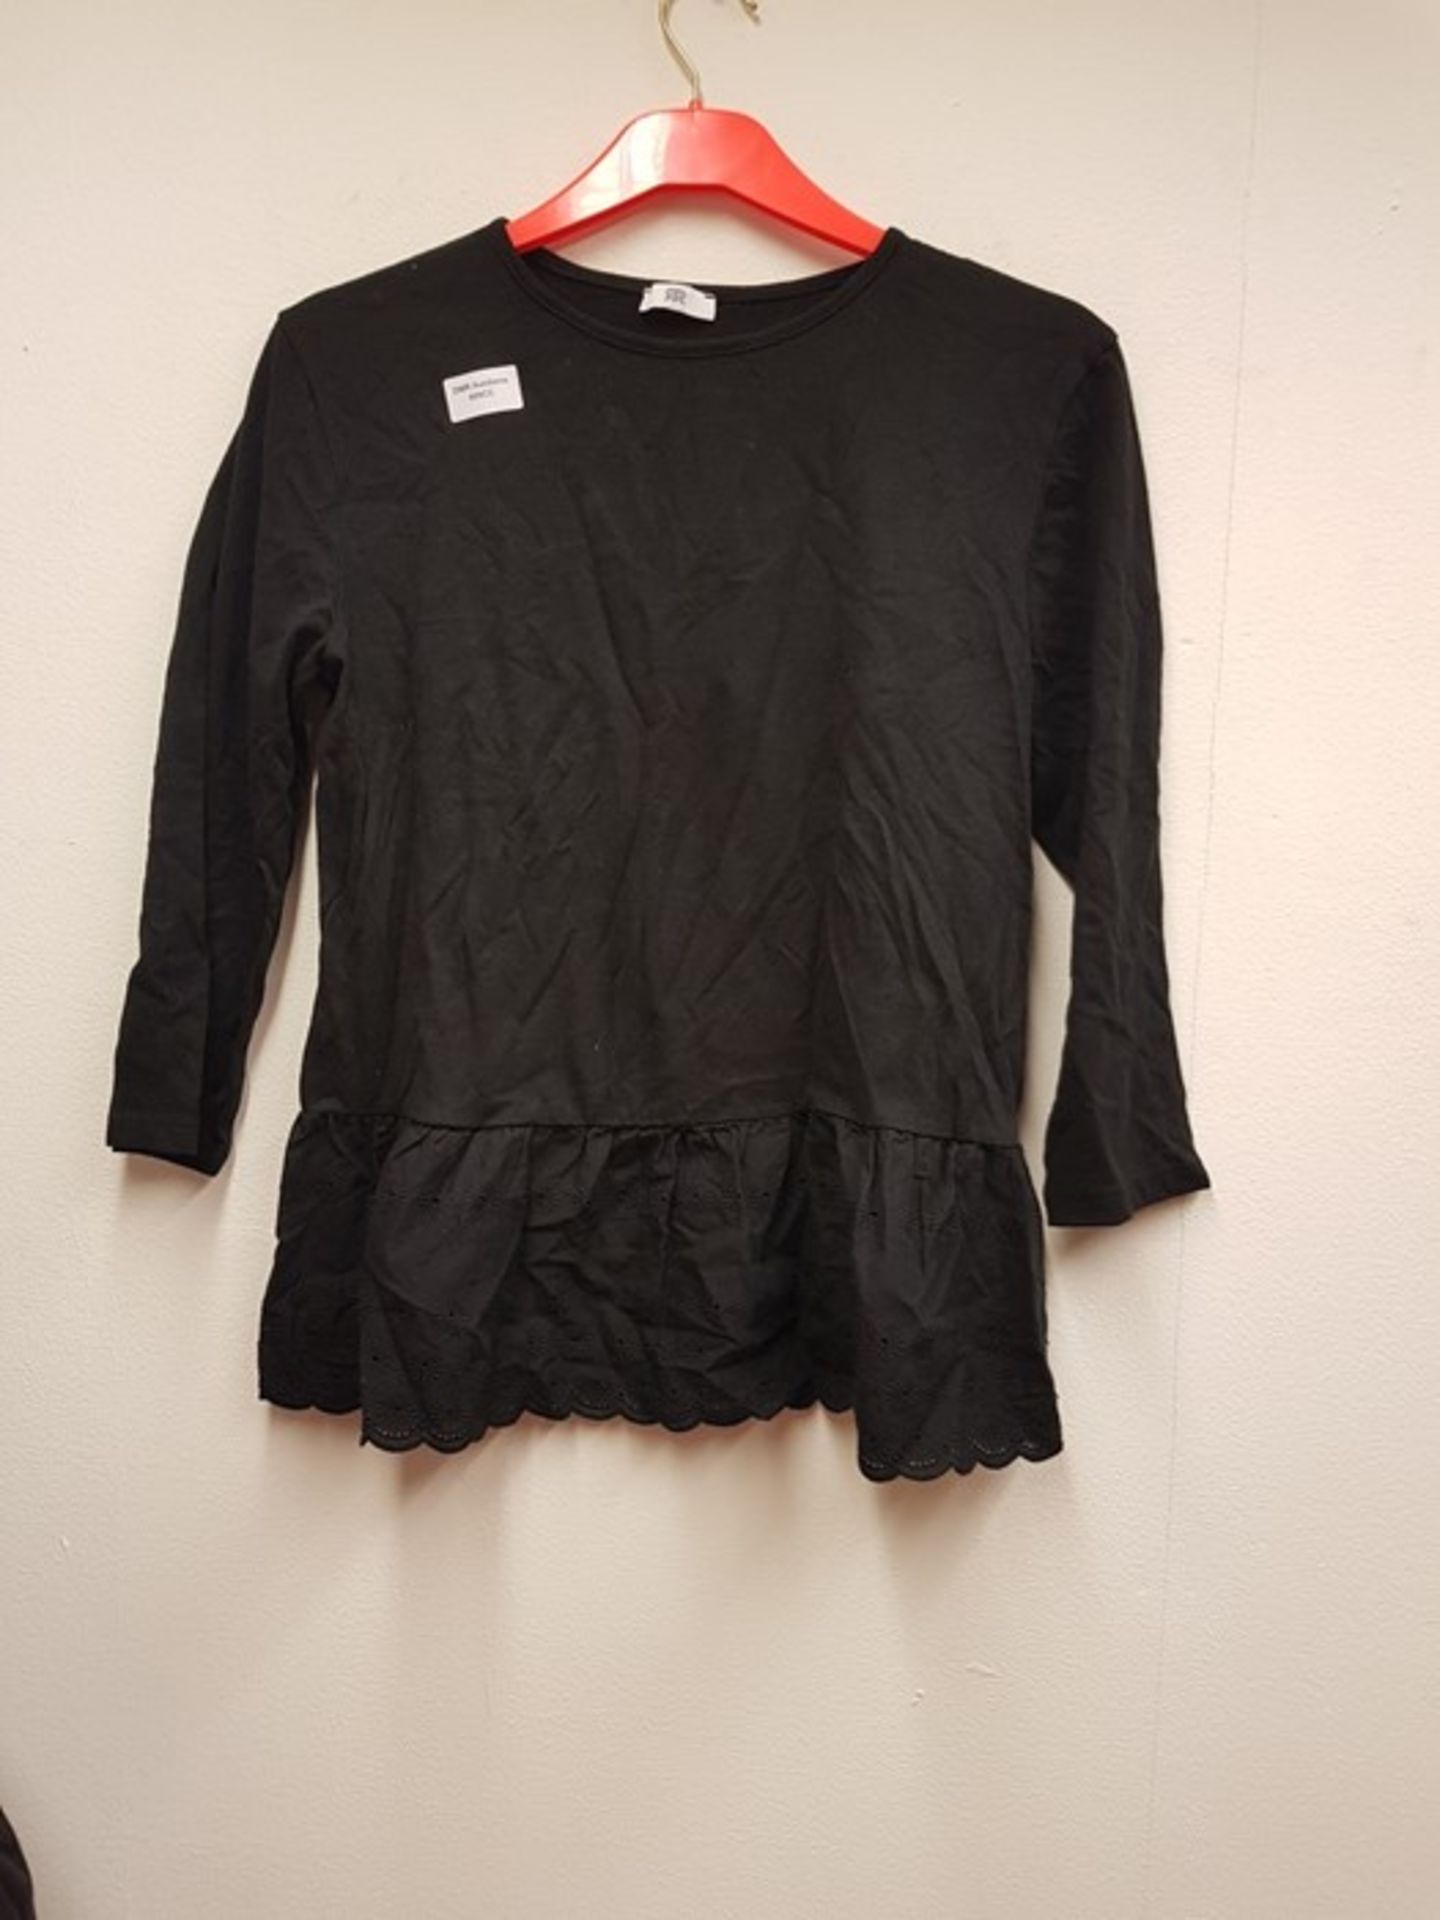 1 AS NEW LA REDOUTE TOP IN BLACK / SIZE M (VIEWING HIGHLY RECOMMENDED)